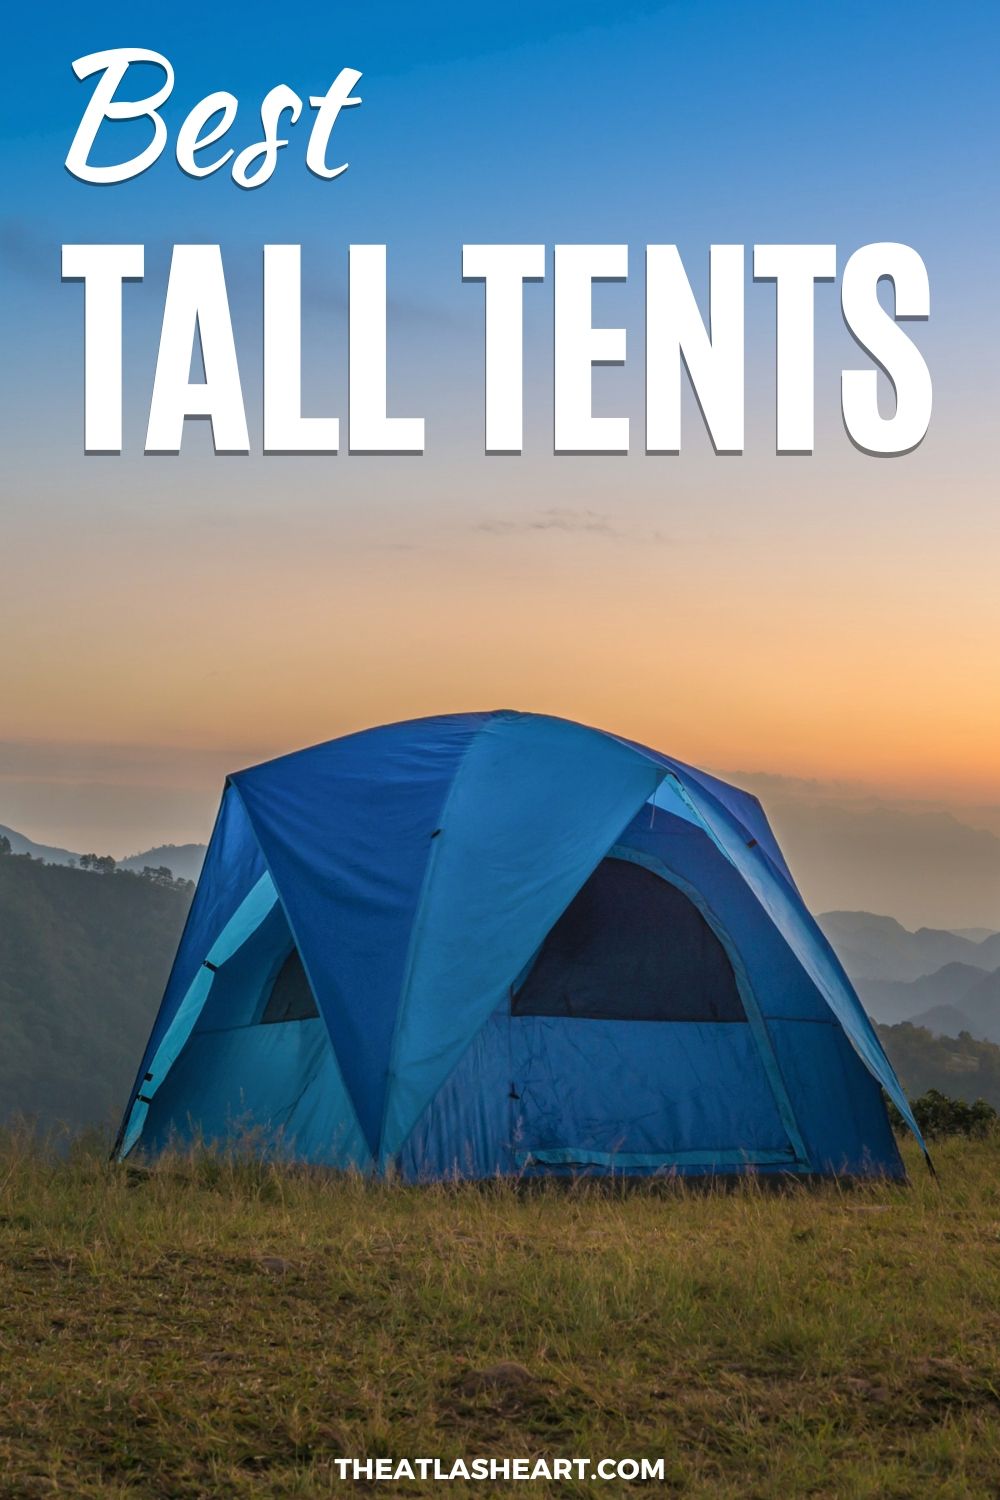 Best Tall Tents Pin
A blue tent with a rain fly set up on a grassy hill in front of mountain ranges that are silhouetted by a sunrise or sunset, with the text overlay, "Best Tall Tents."